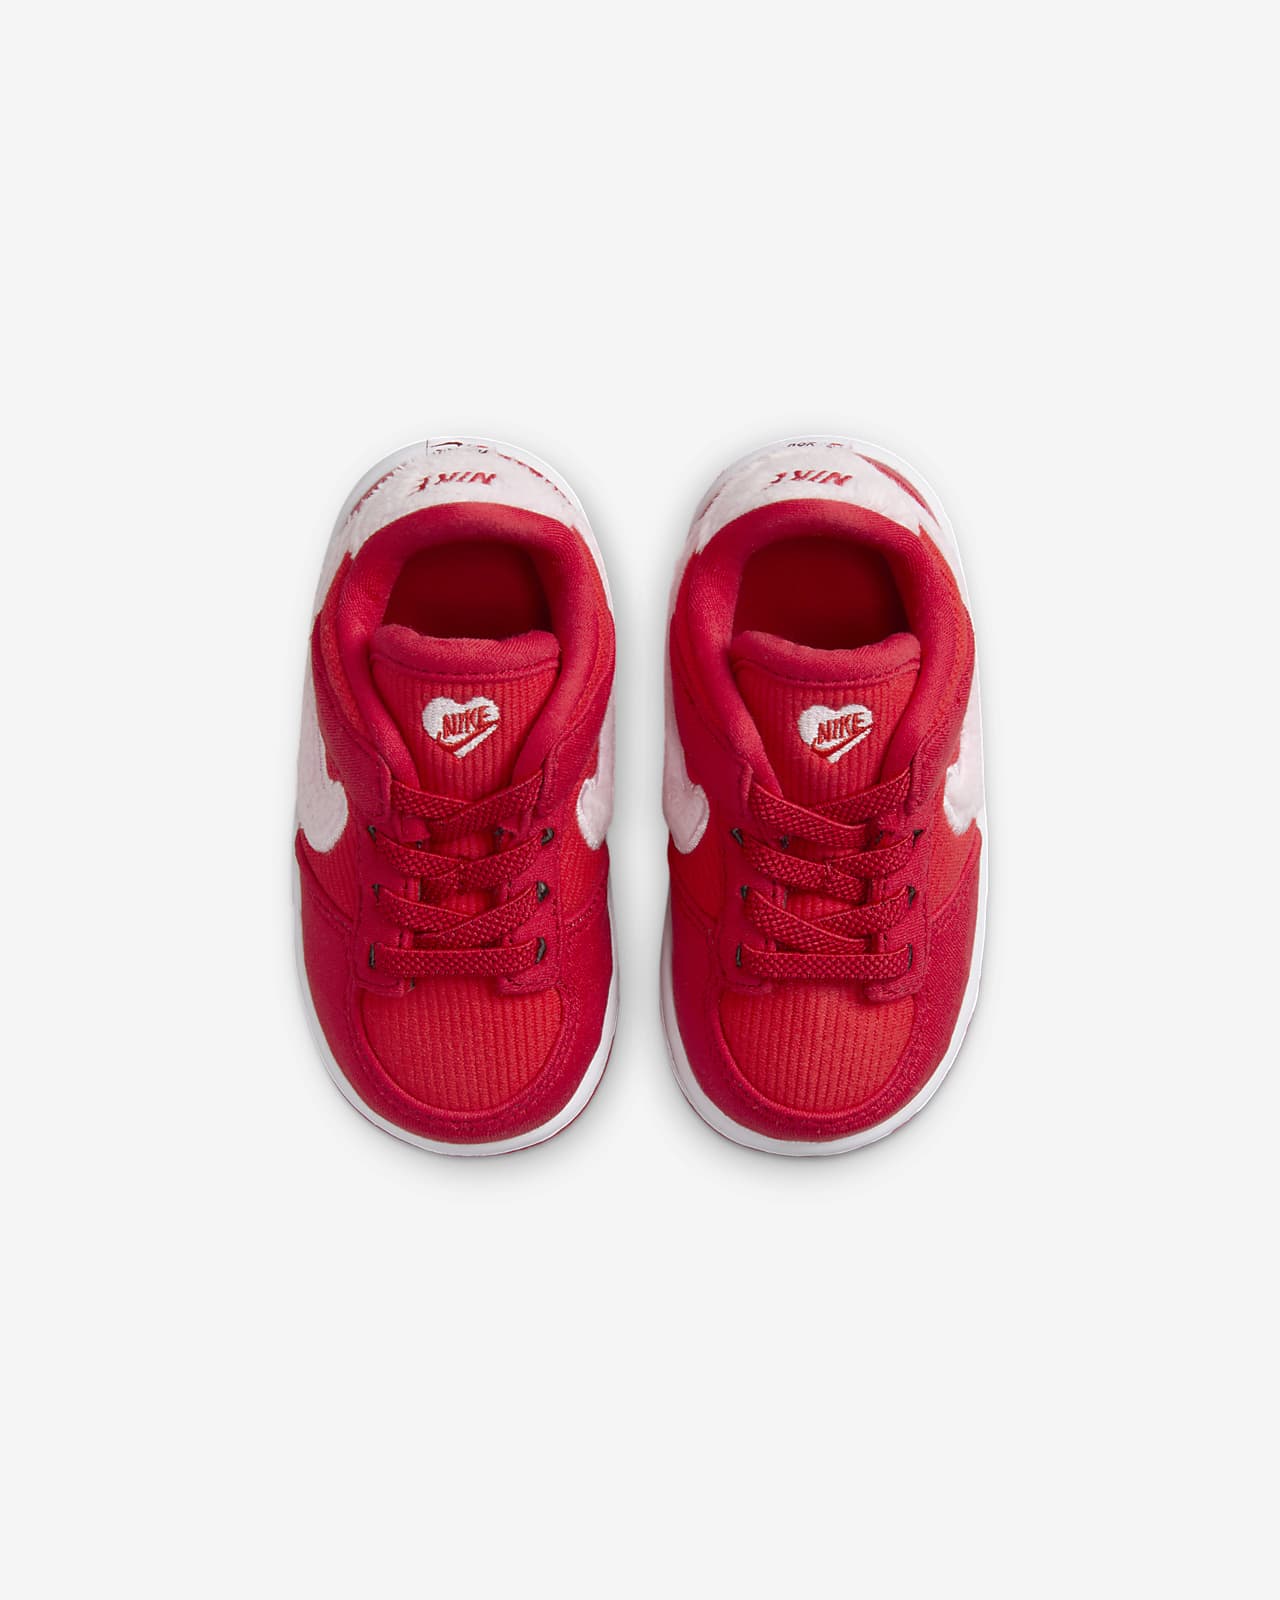 Nike Court Borough Low 2 Baby/Toddler Shoes.